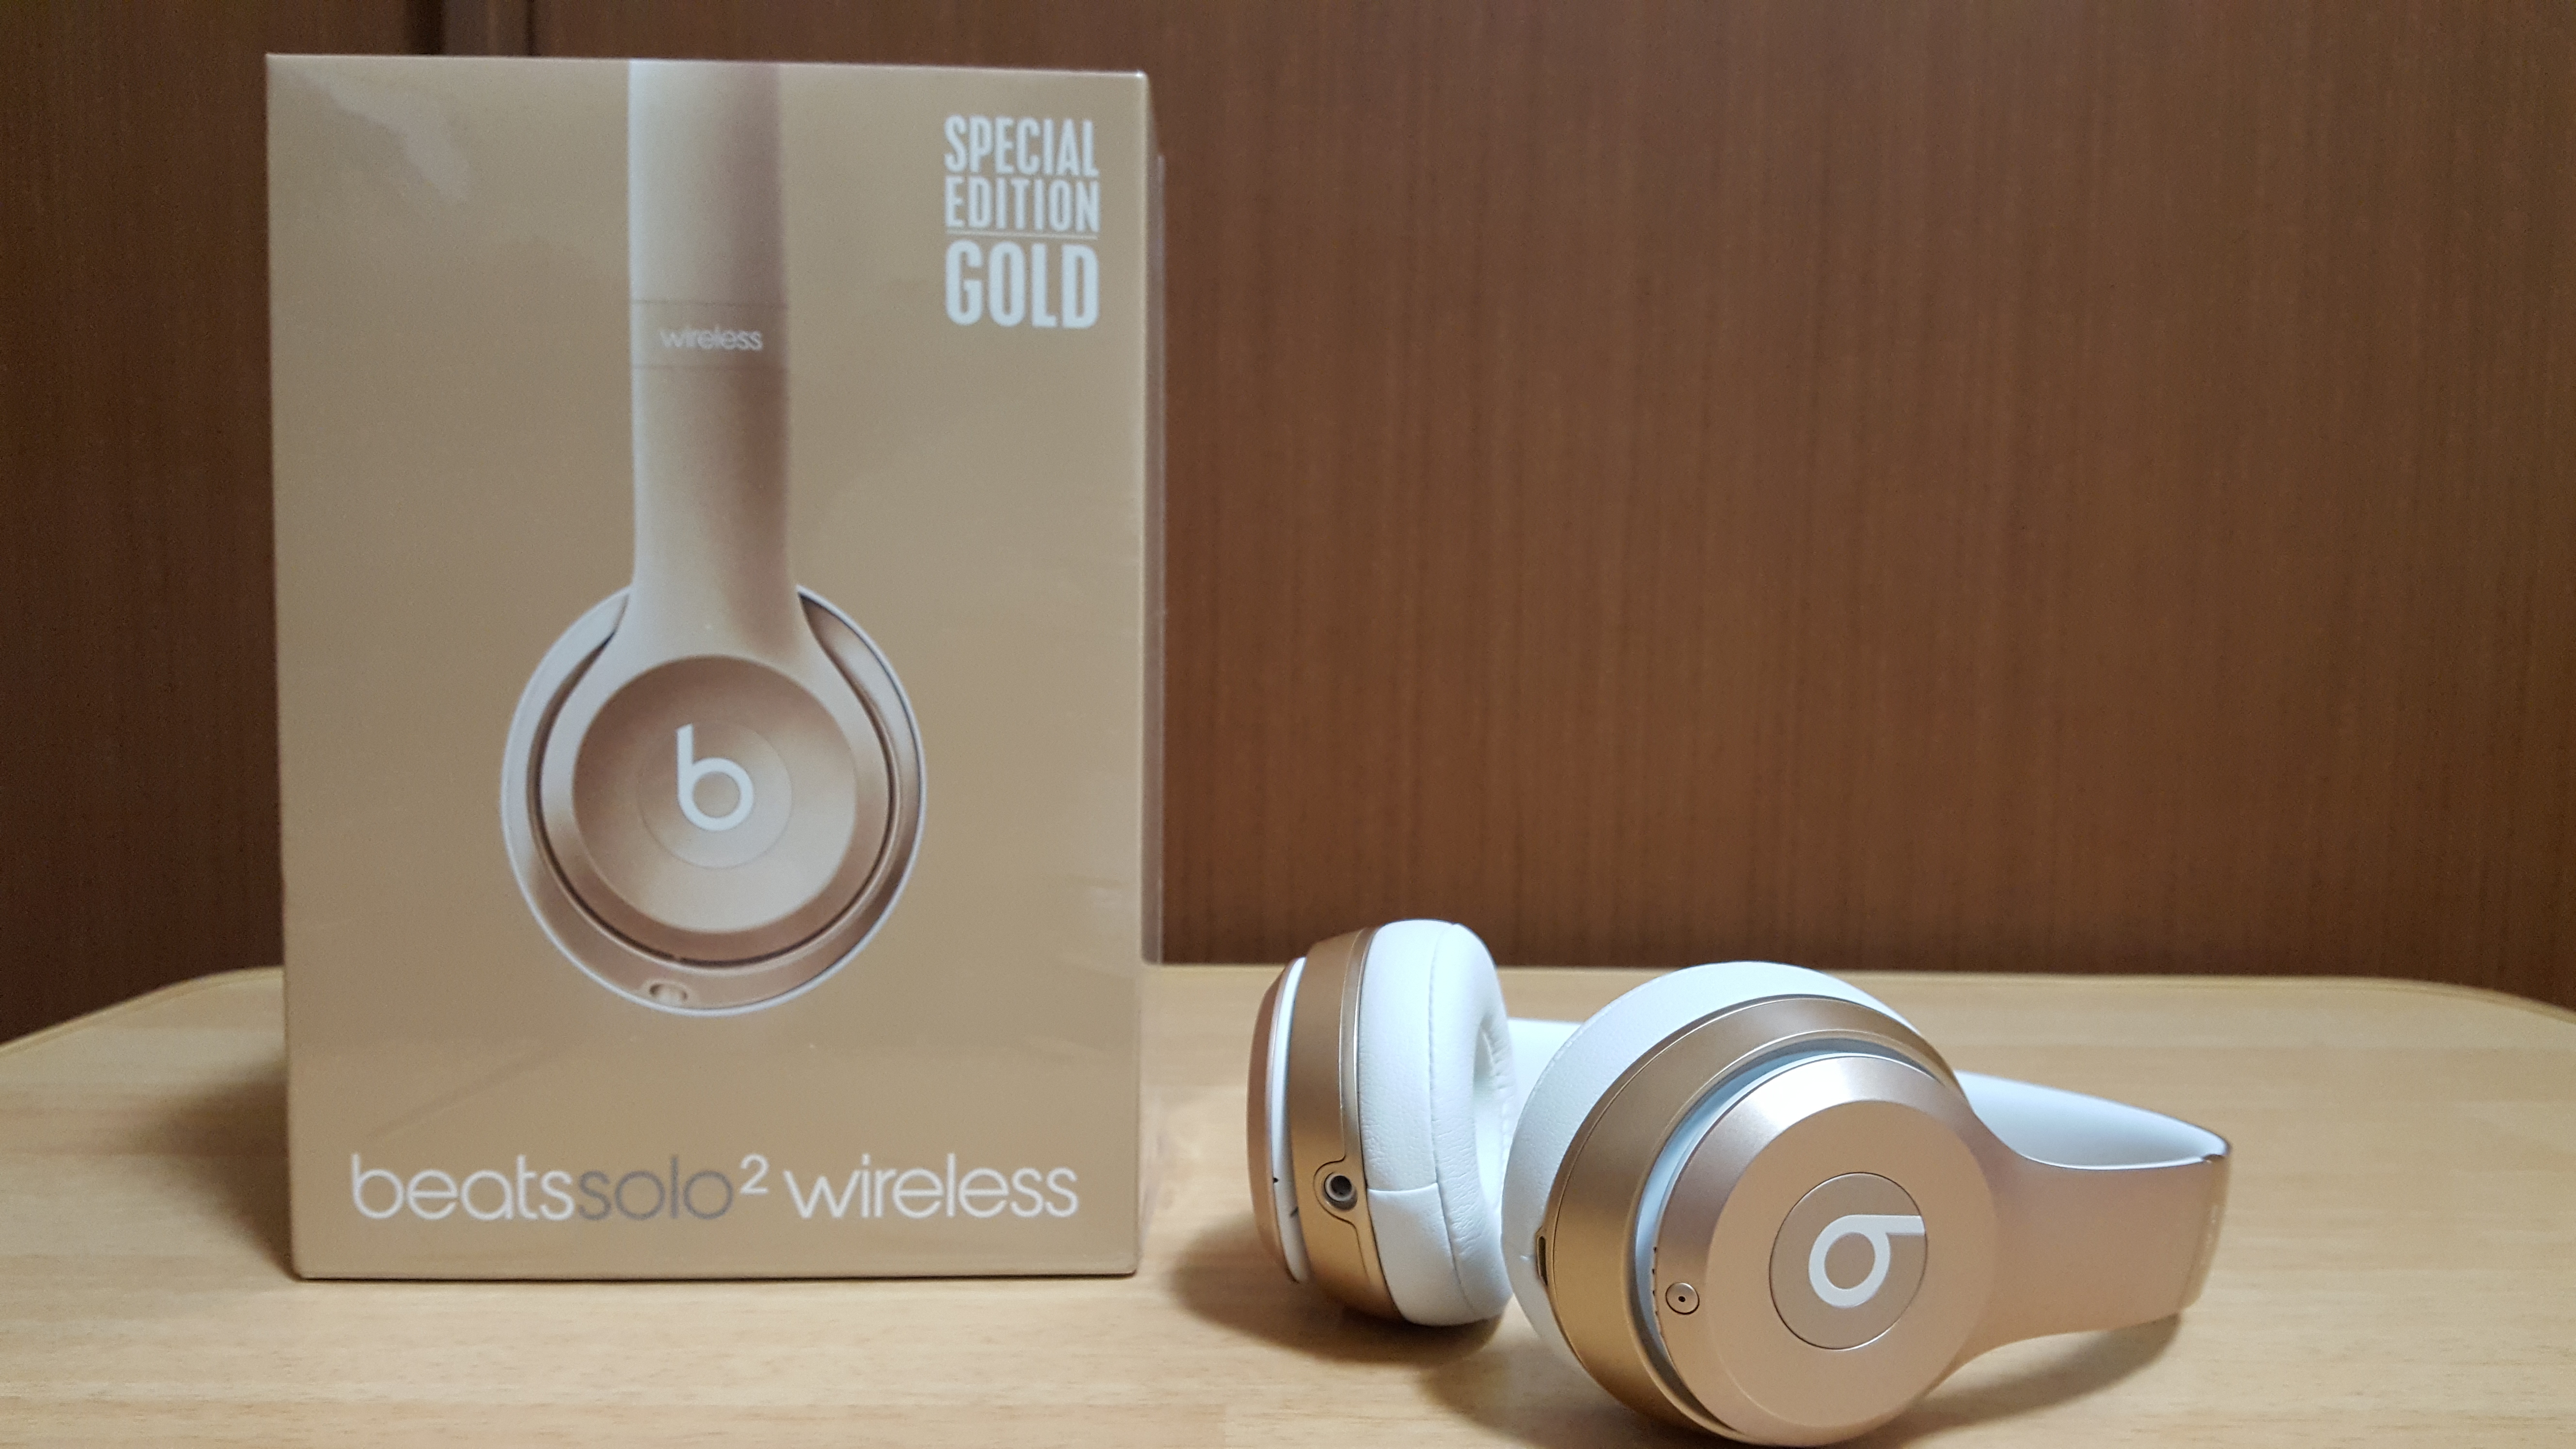 beats by dr.dre「Beats Solo2 ワイヤレス」レビュー。コンパクト×ワイヤレスで快適！